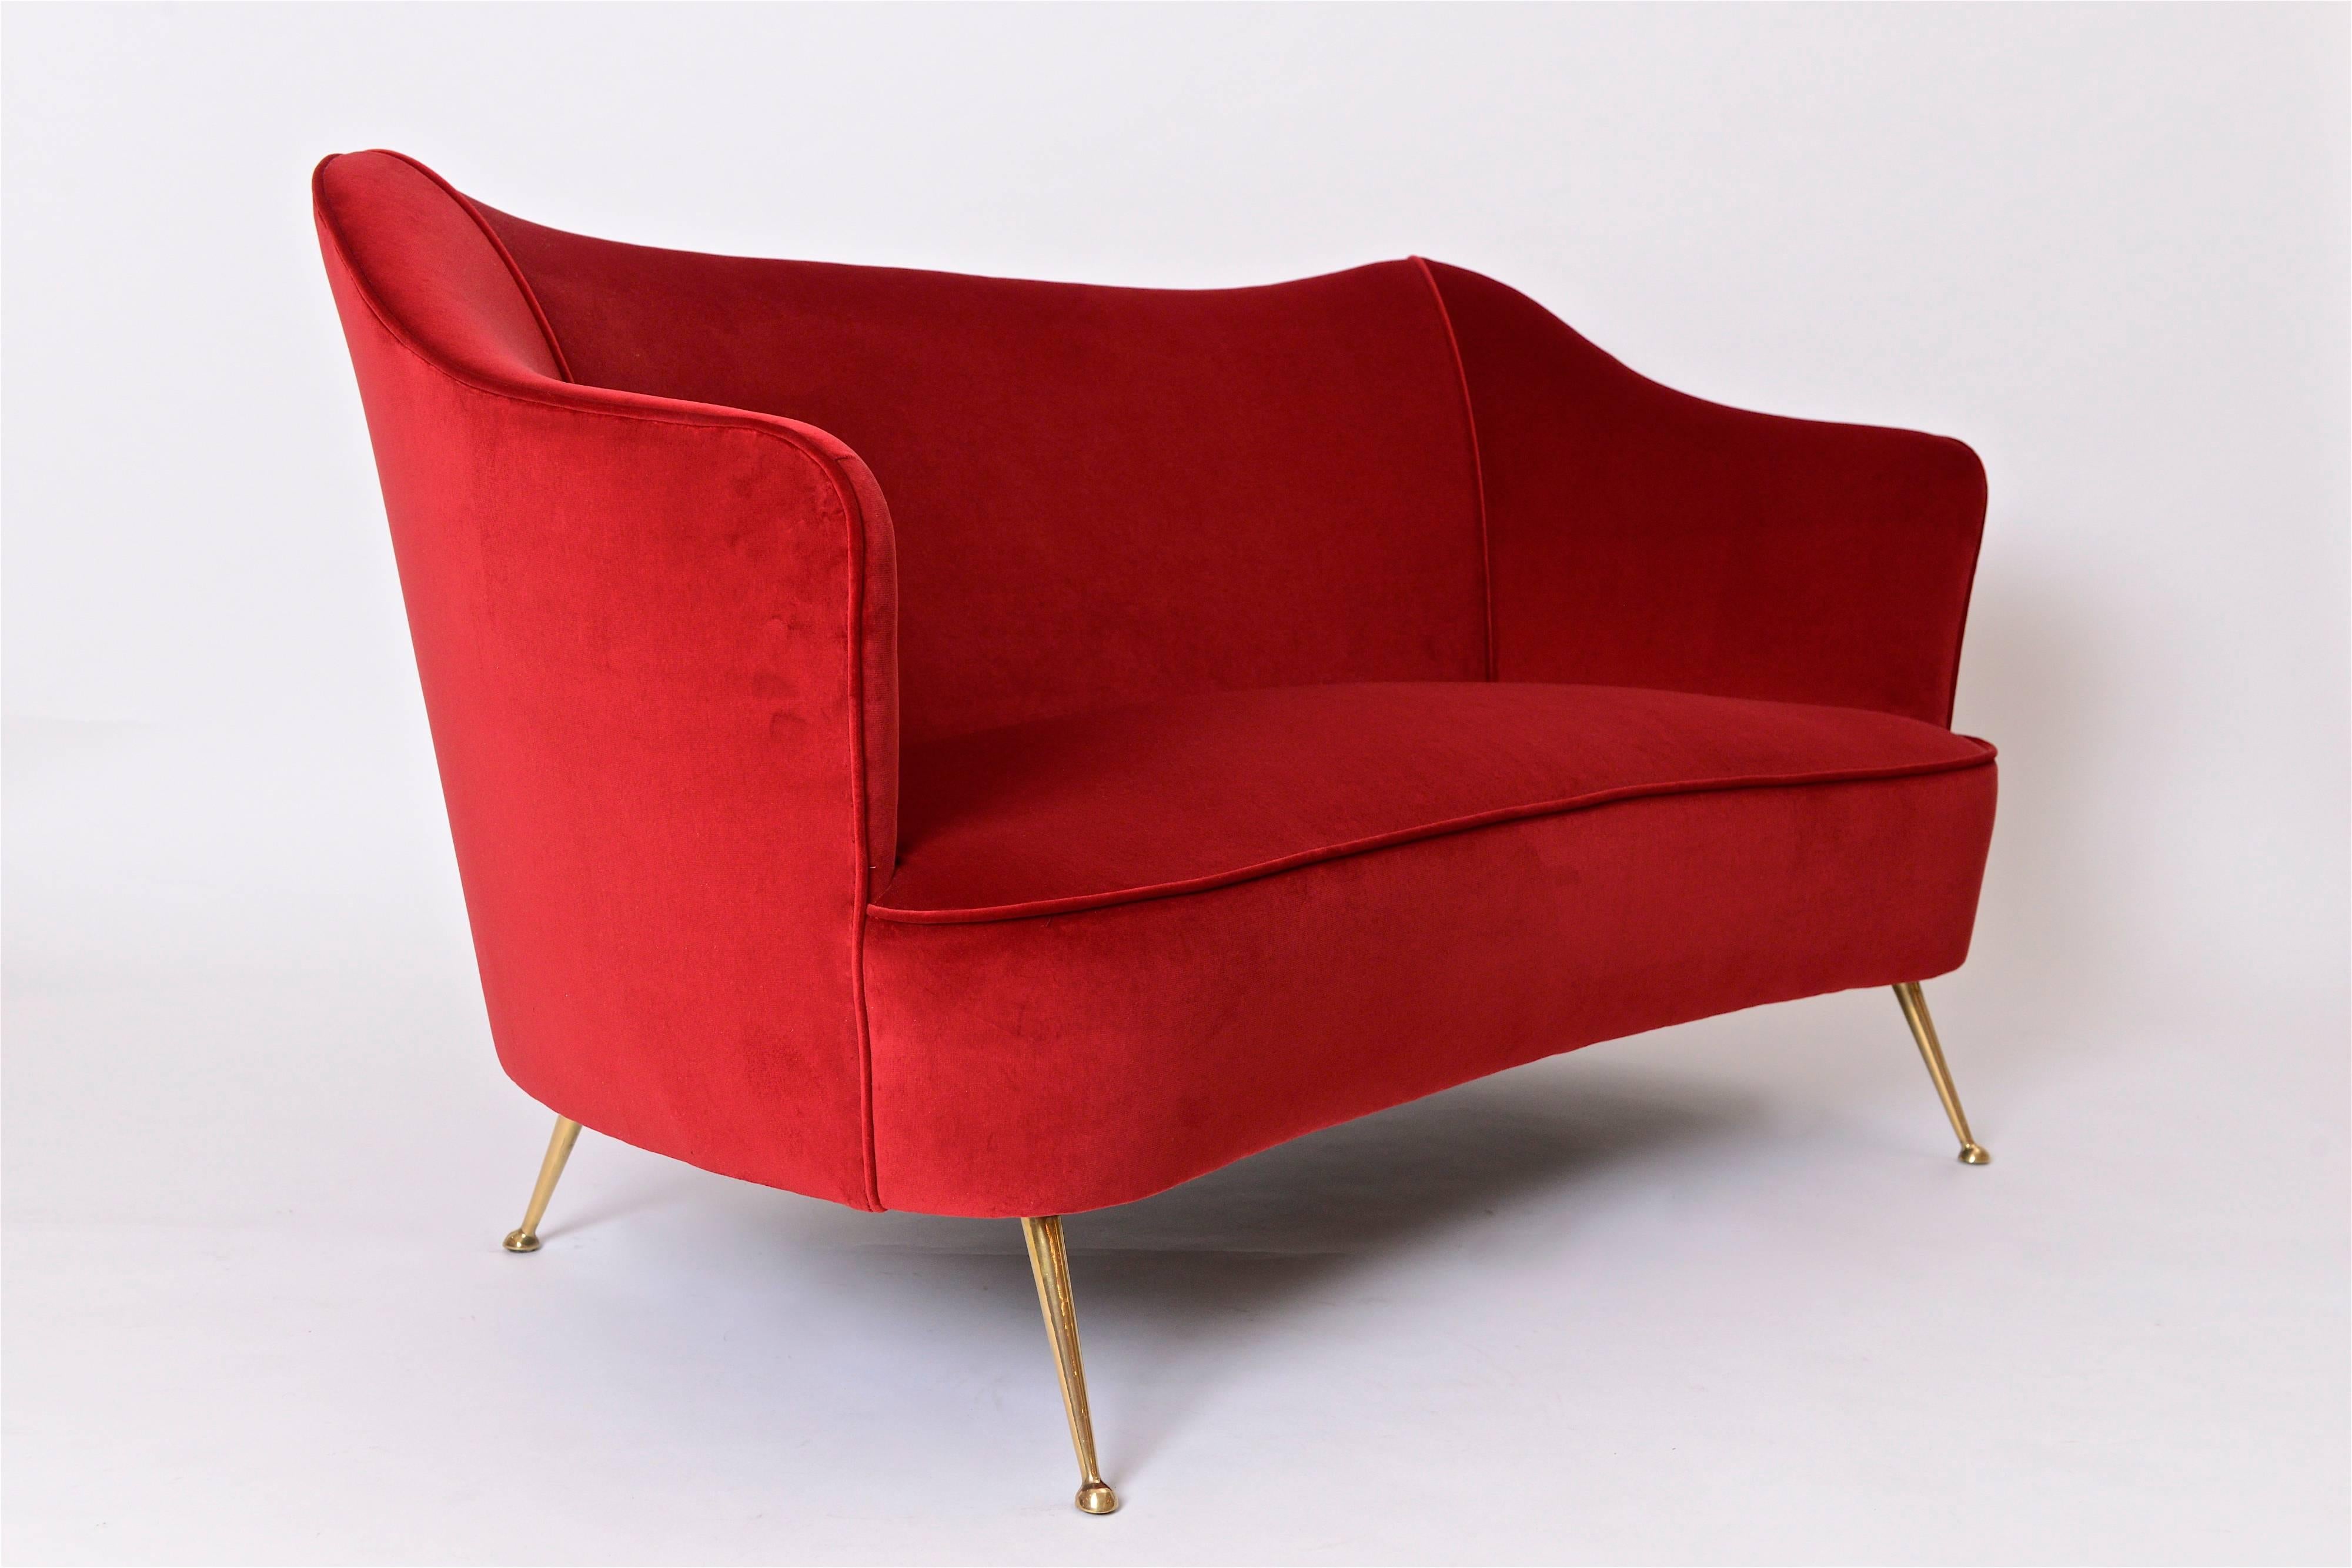 A very attractive three-piece lounge suite comprising of a two-seat settee and its two matching chairs. Newly upholstered in a chic, blood red velvet by Holland and Sherry, the suite rests on its elegantly splayed polished brass legs. The wonderful,